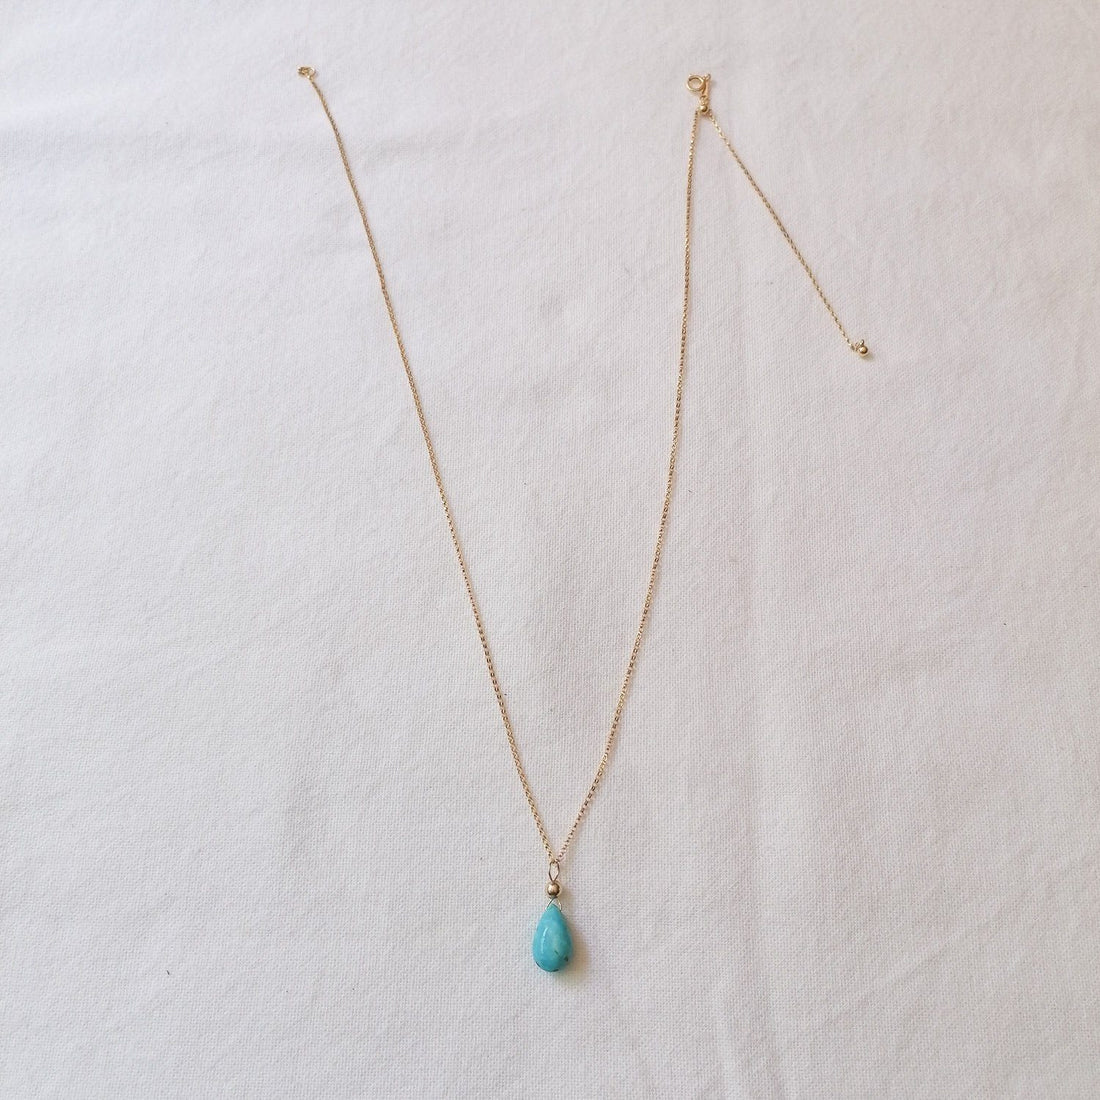 Mexican Turquoise Isla Pendant in Gold Necklaces Sayulita Sol 14kt Gold Fill Adjustable Chain +$85 